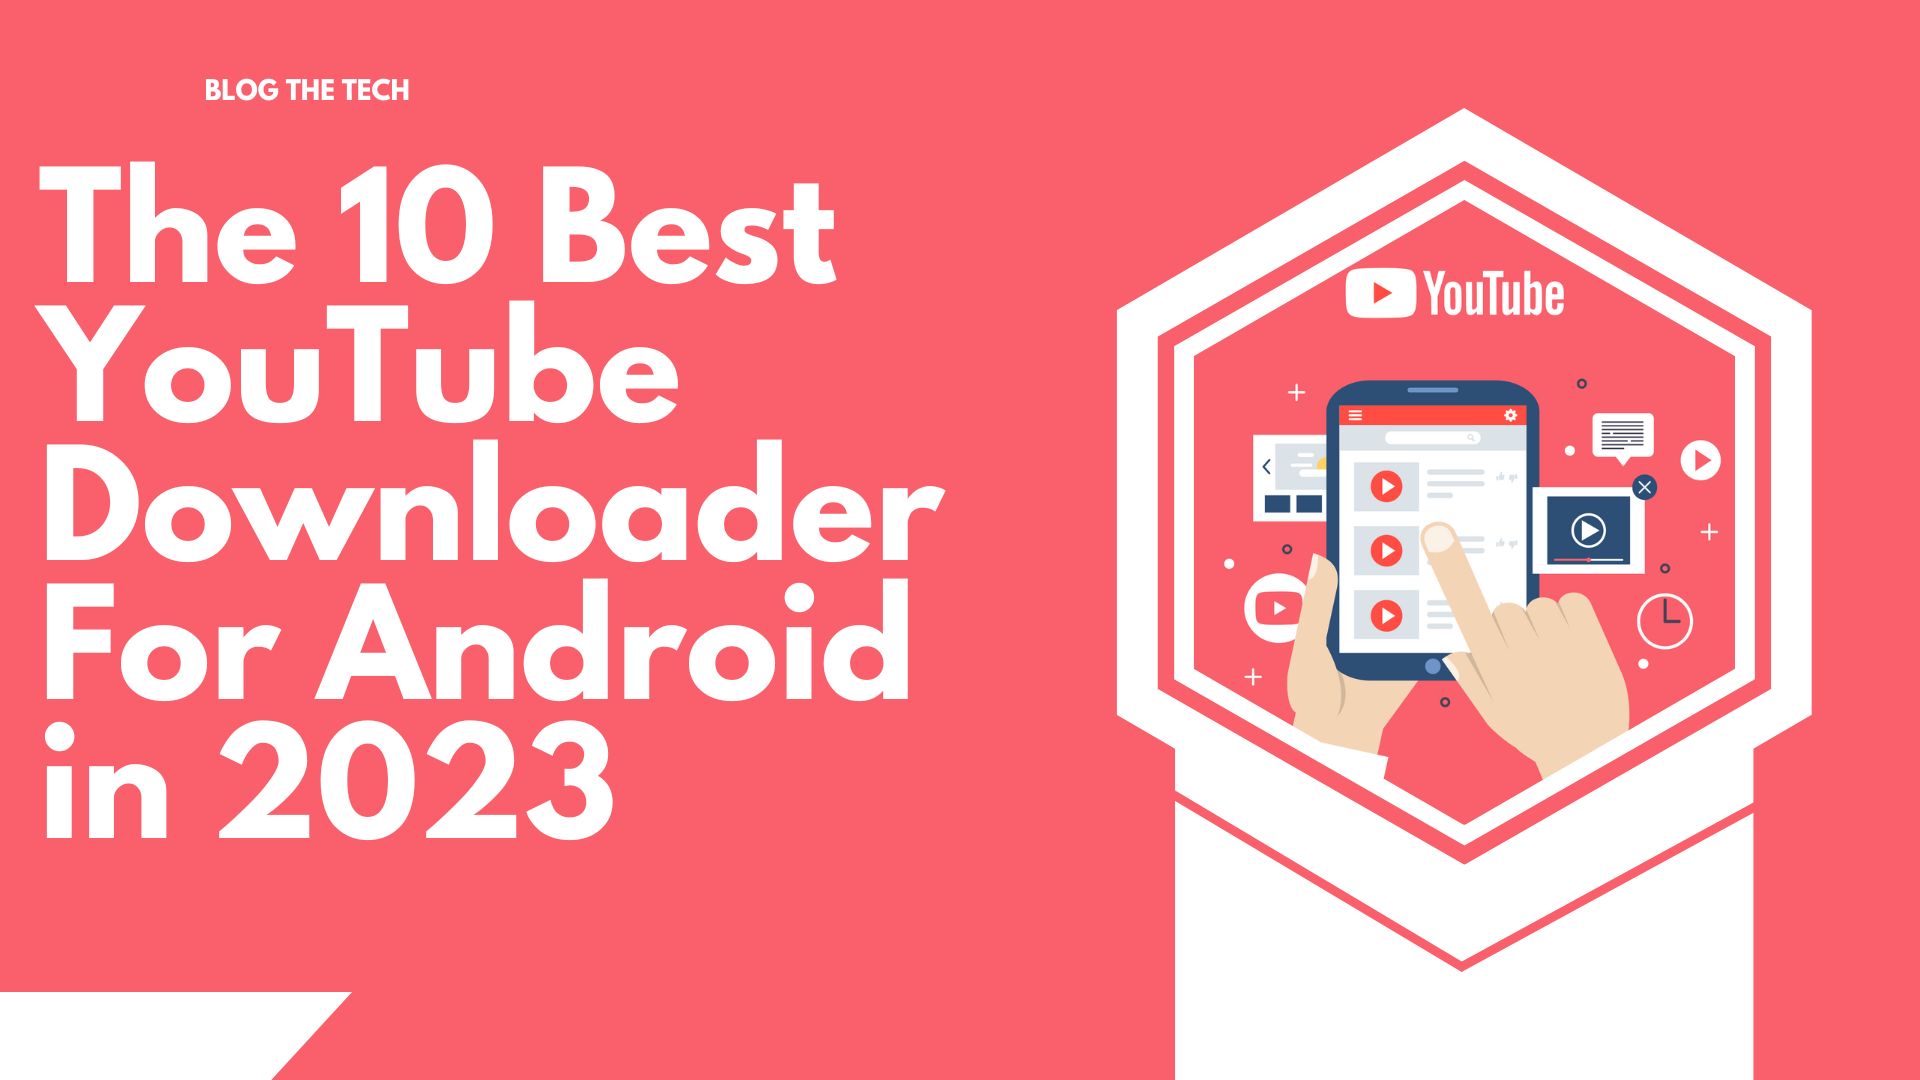 The 10 Best YouTube Downloader For Android in 2023